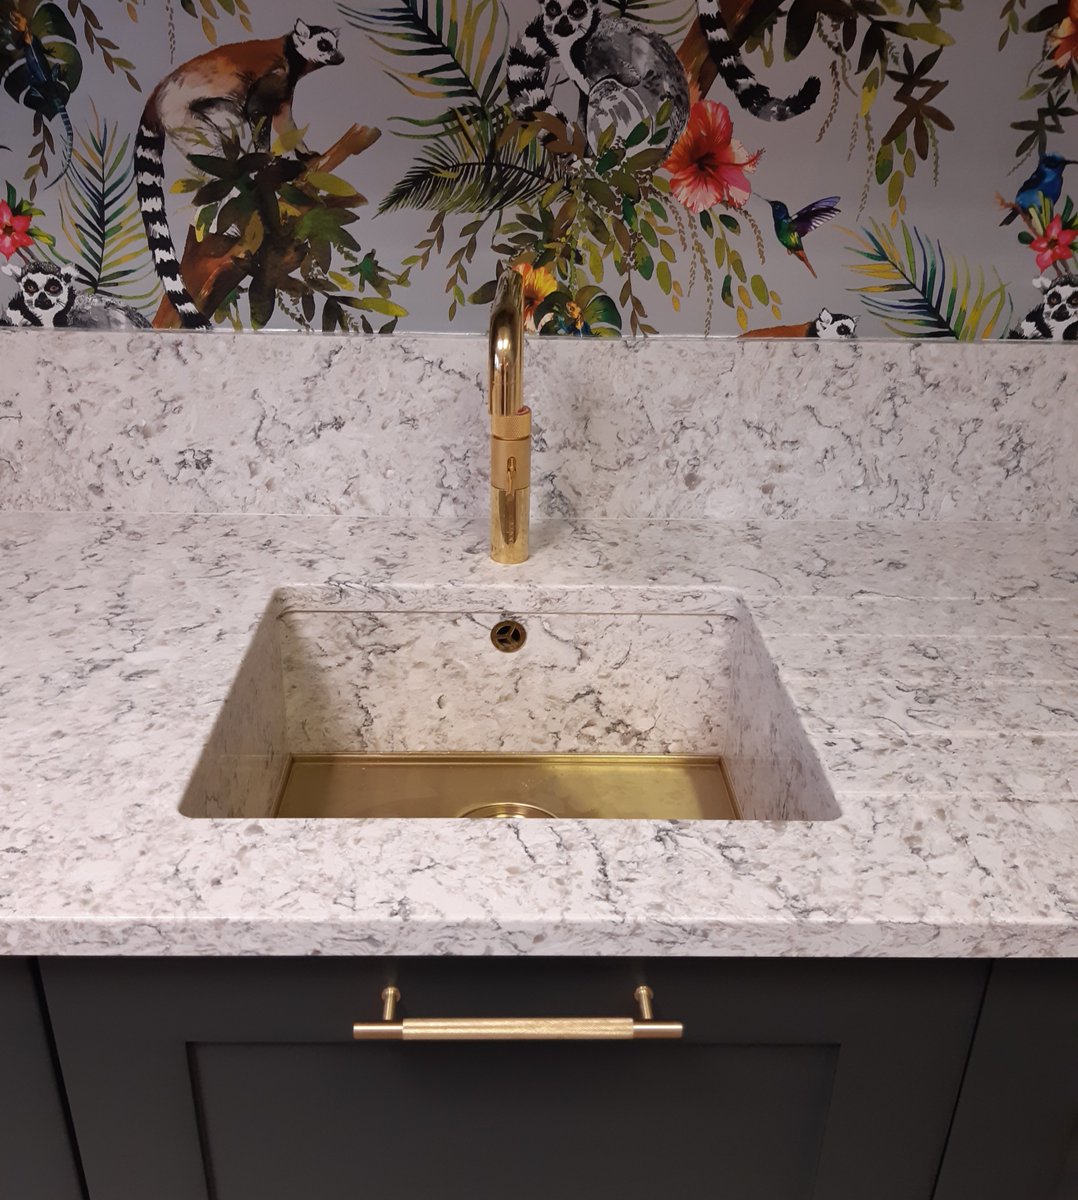 This fantastic new @stonehamkitchen display has just been completed at our #Lymington showroom!

Featuring:
Worksurface by @CRLstone 
Tap by @quookeruk 
Sink by @1810co 

Head to our showroom on Ampress Park, SO41 8JU to see it for yourself!

#kitchens #kitchendesign